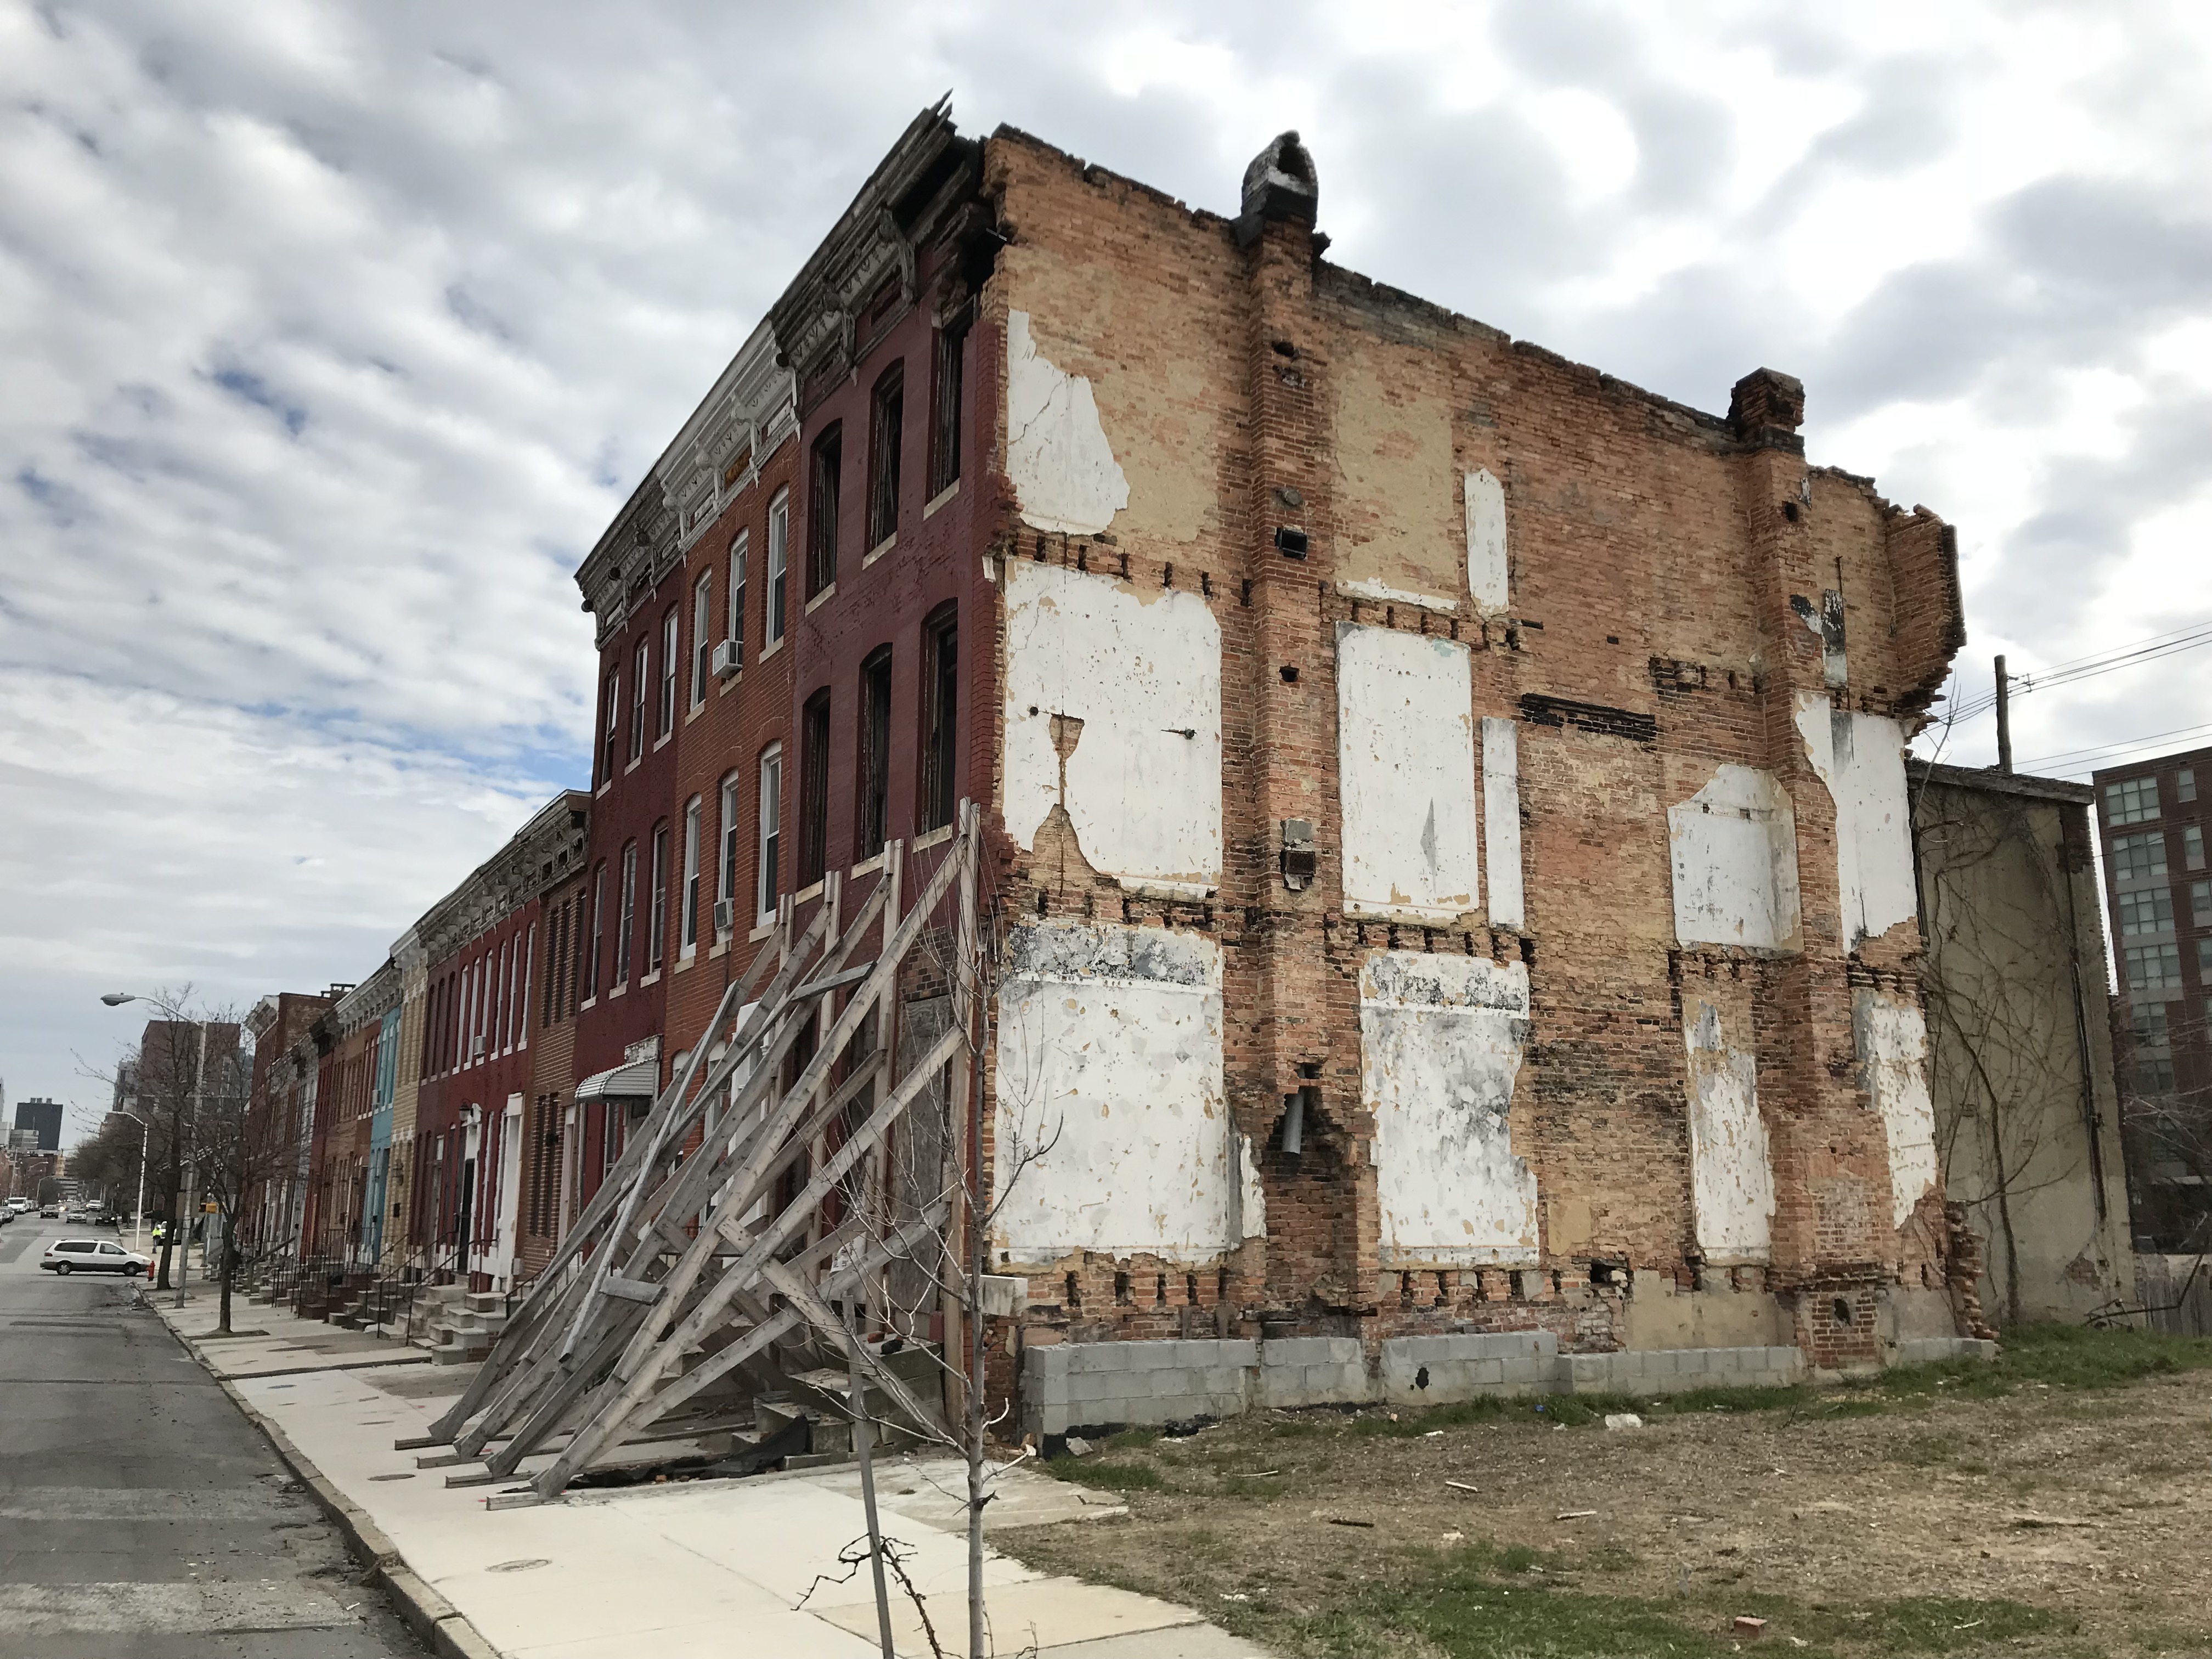 Stabilized vacant rowhouse following demolition, 1000 block of w. fayette street (south side), baltimore, md 21223 photo